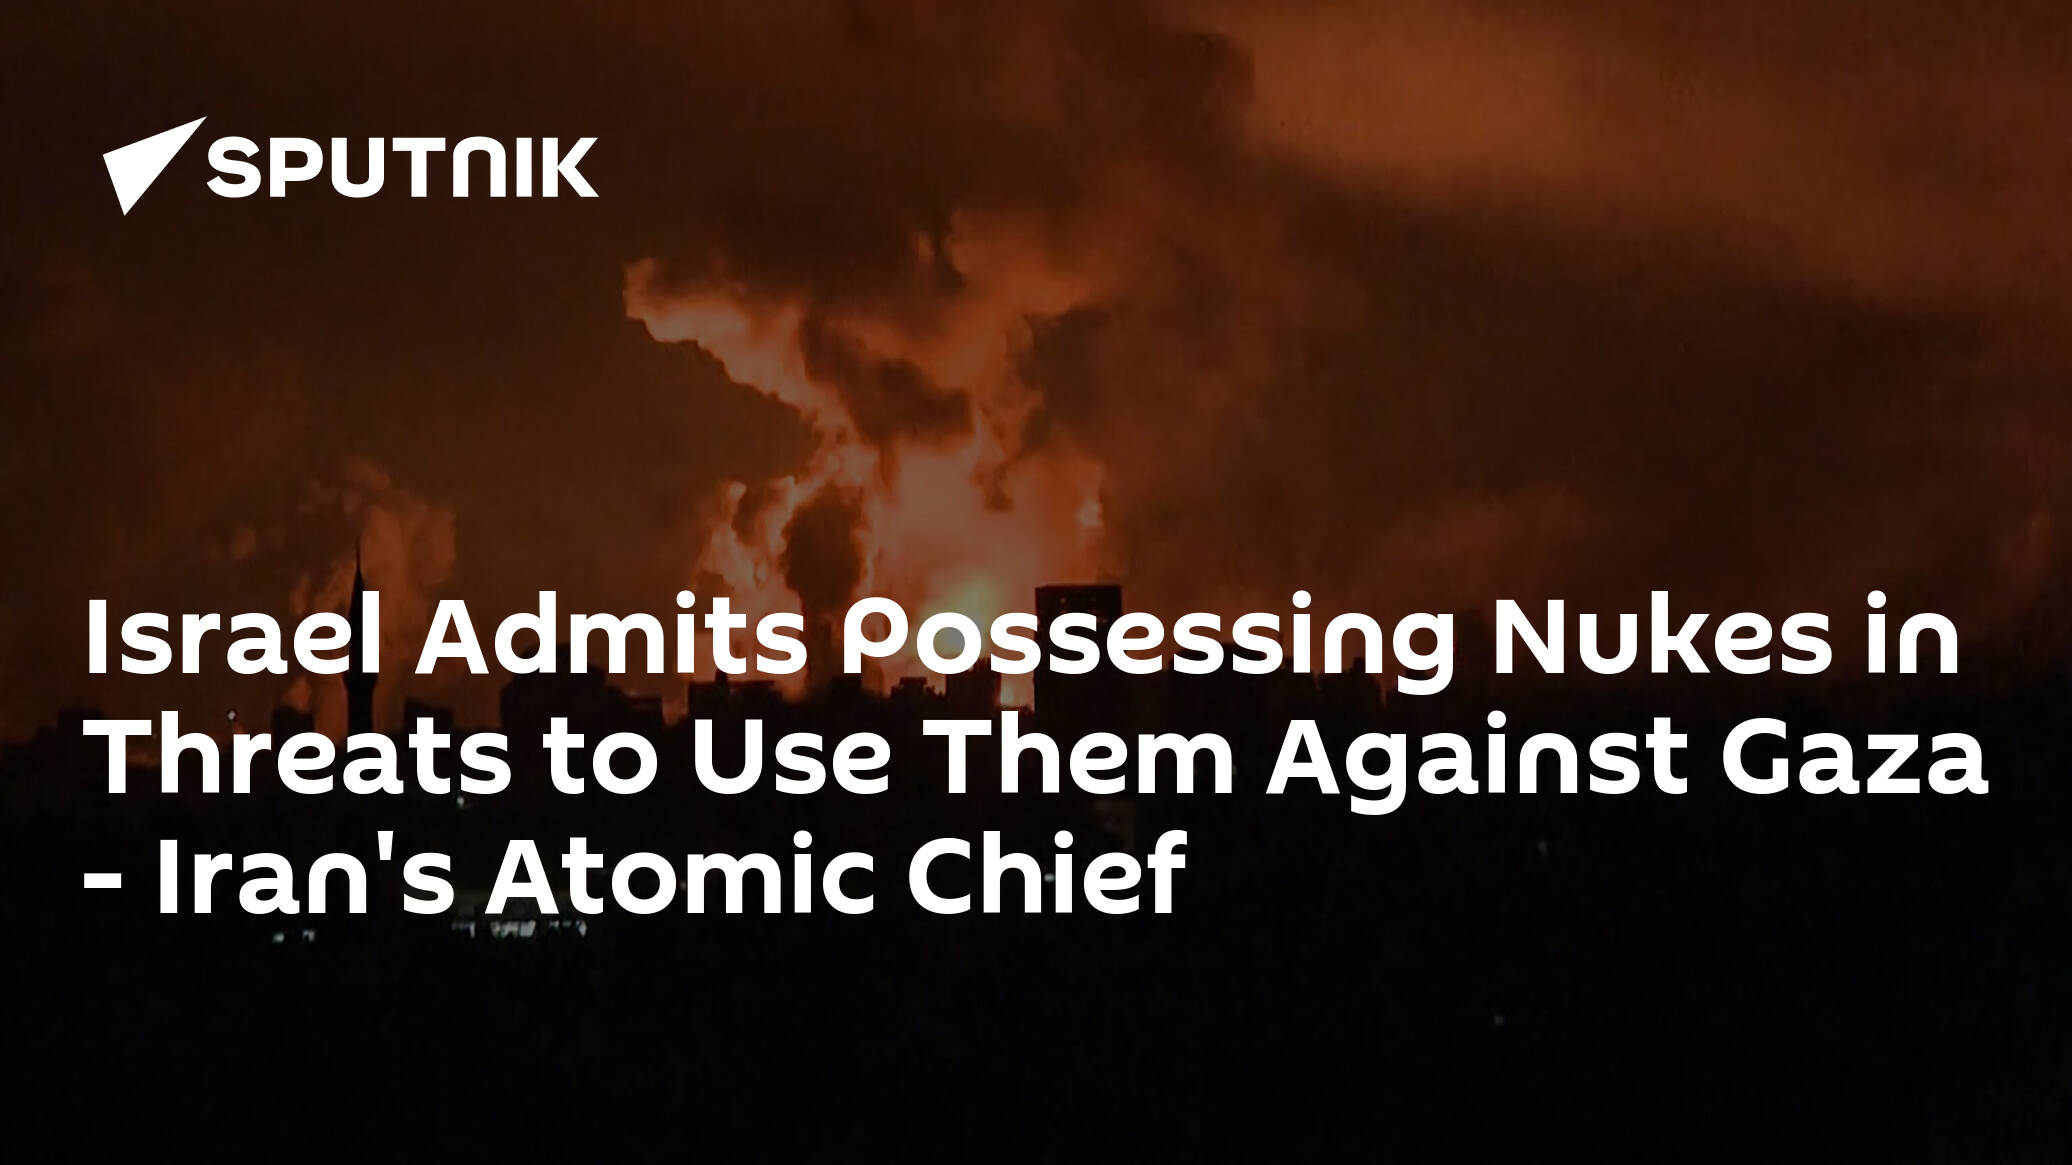 Israel Admits Possessing Nukes in Threats to Use Them Against Gaza – Iran's Atomic Chief